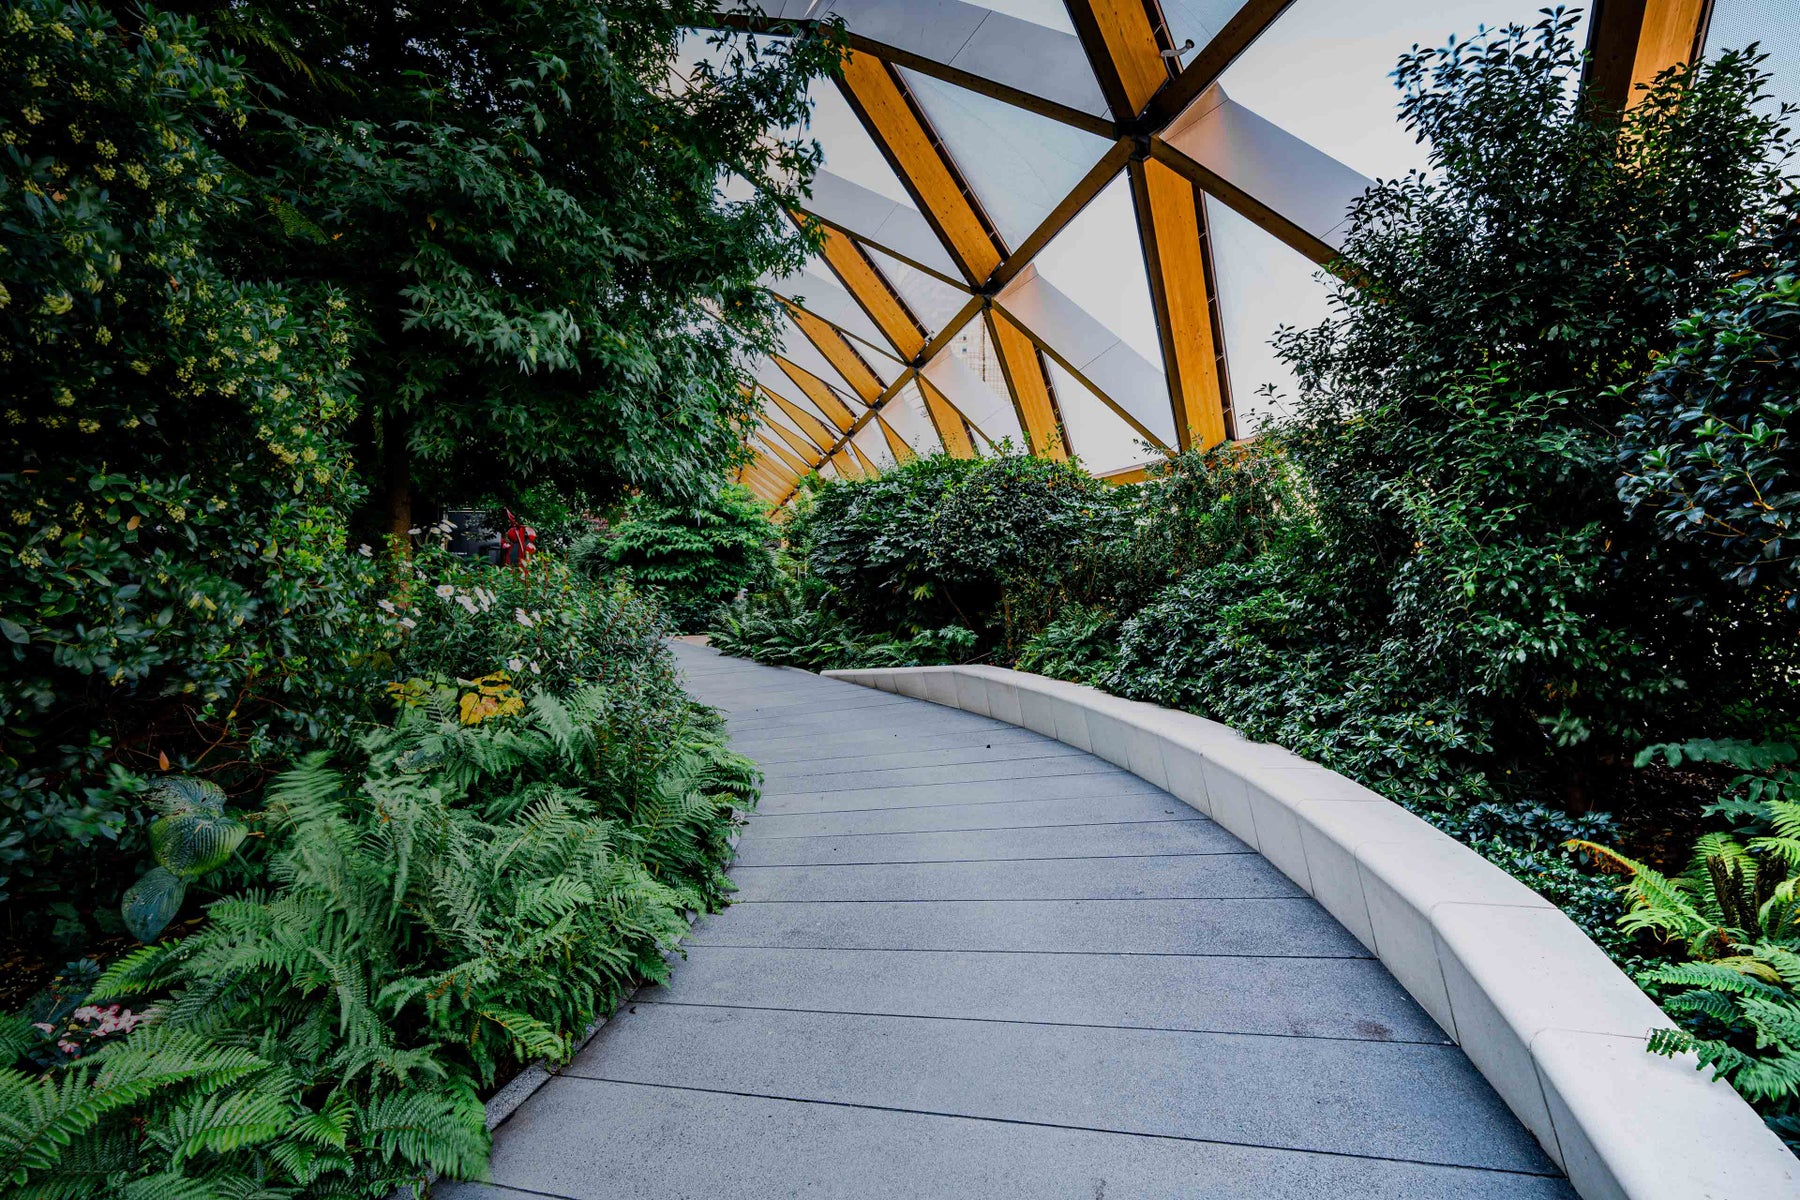 High-tech timber structure above a public park in Canary Wharf London